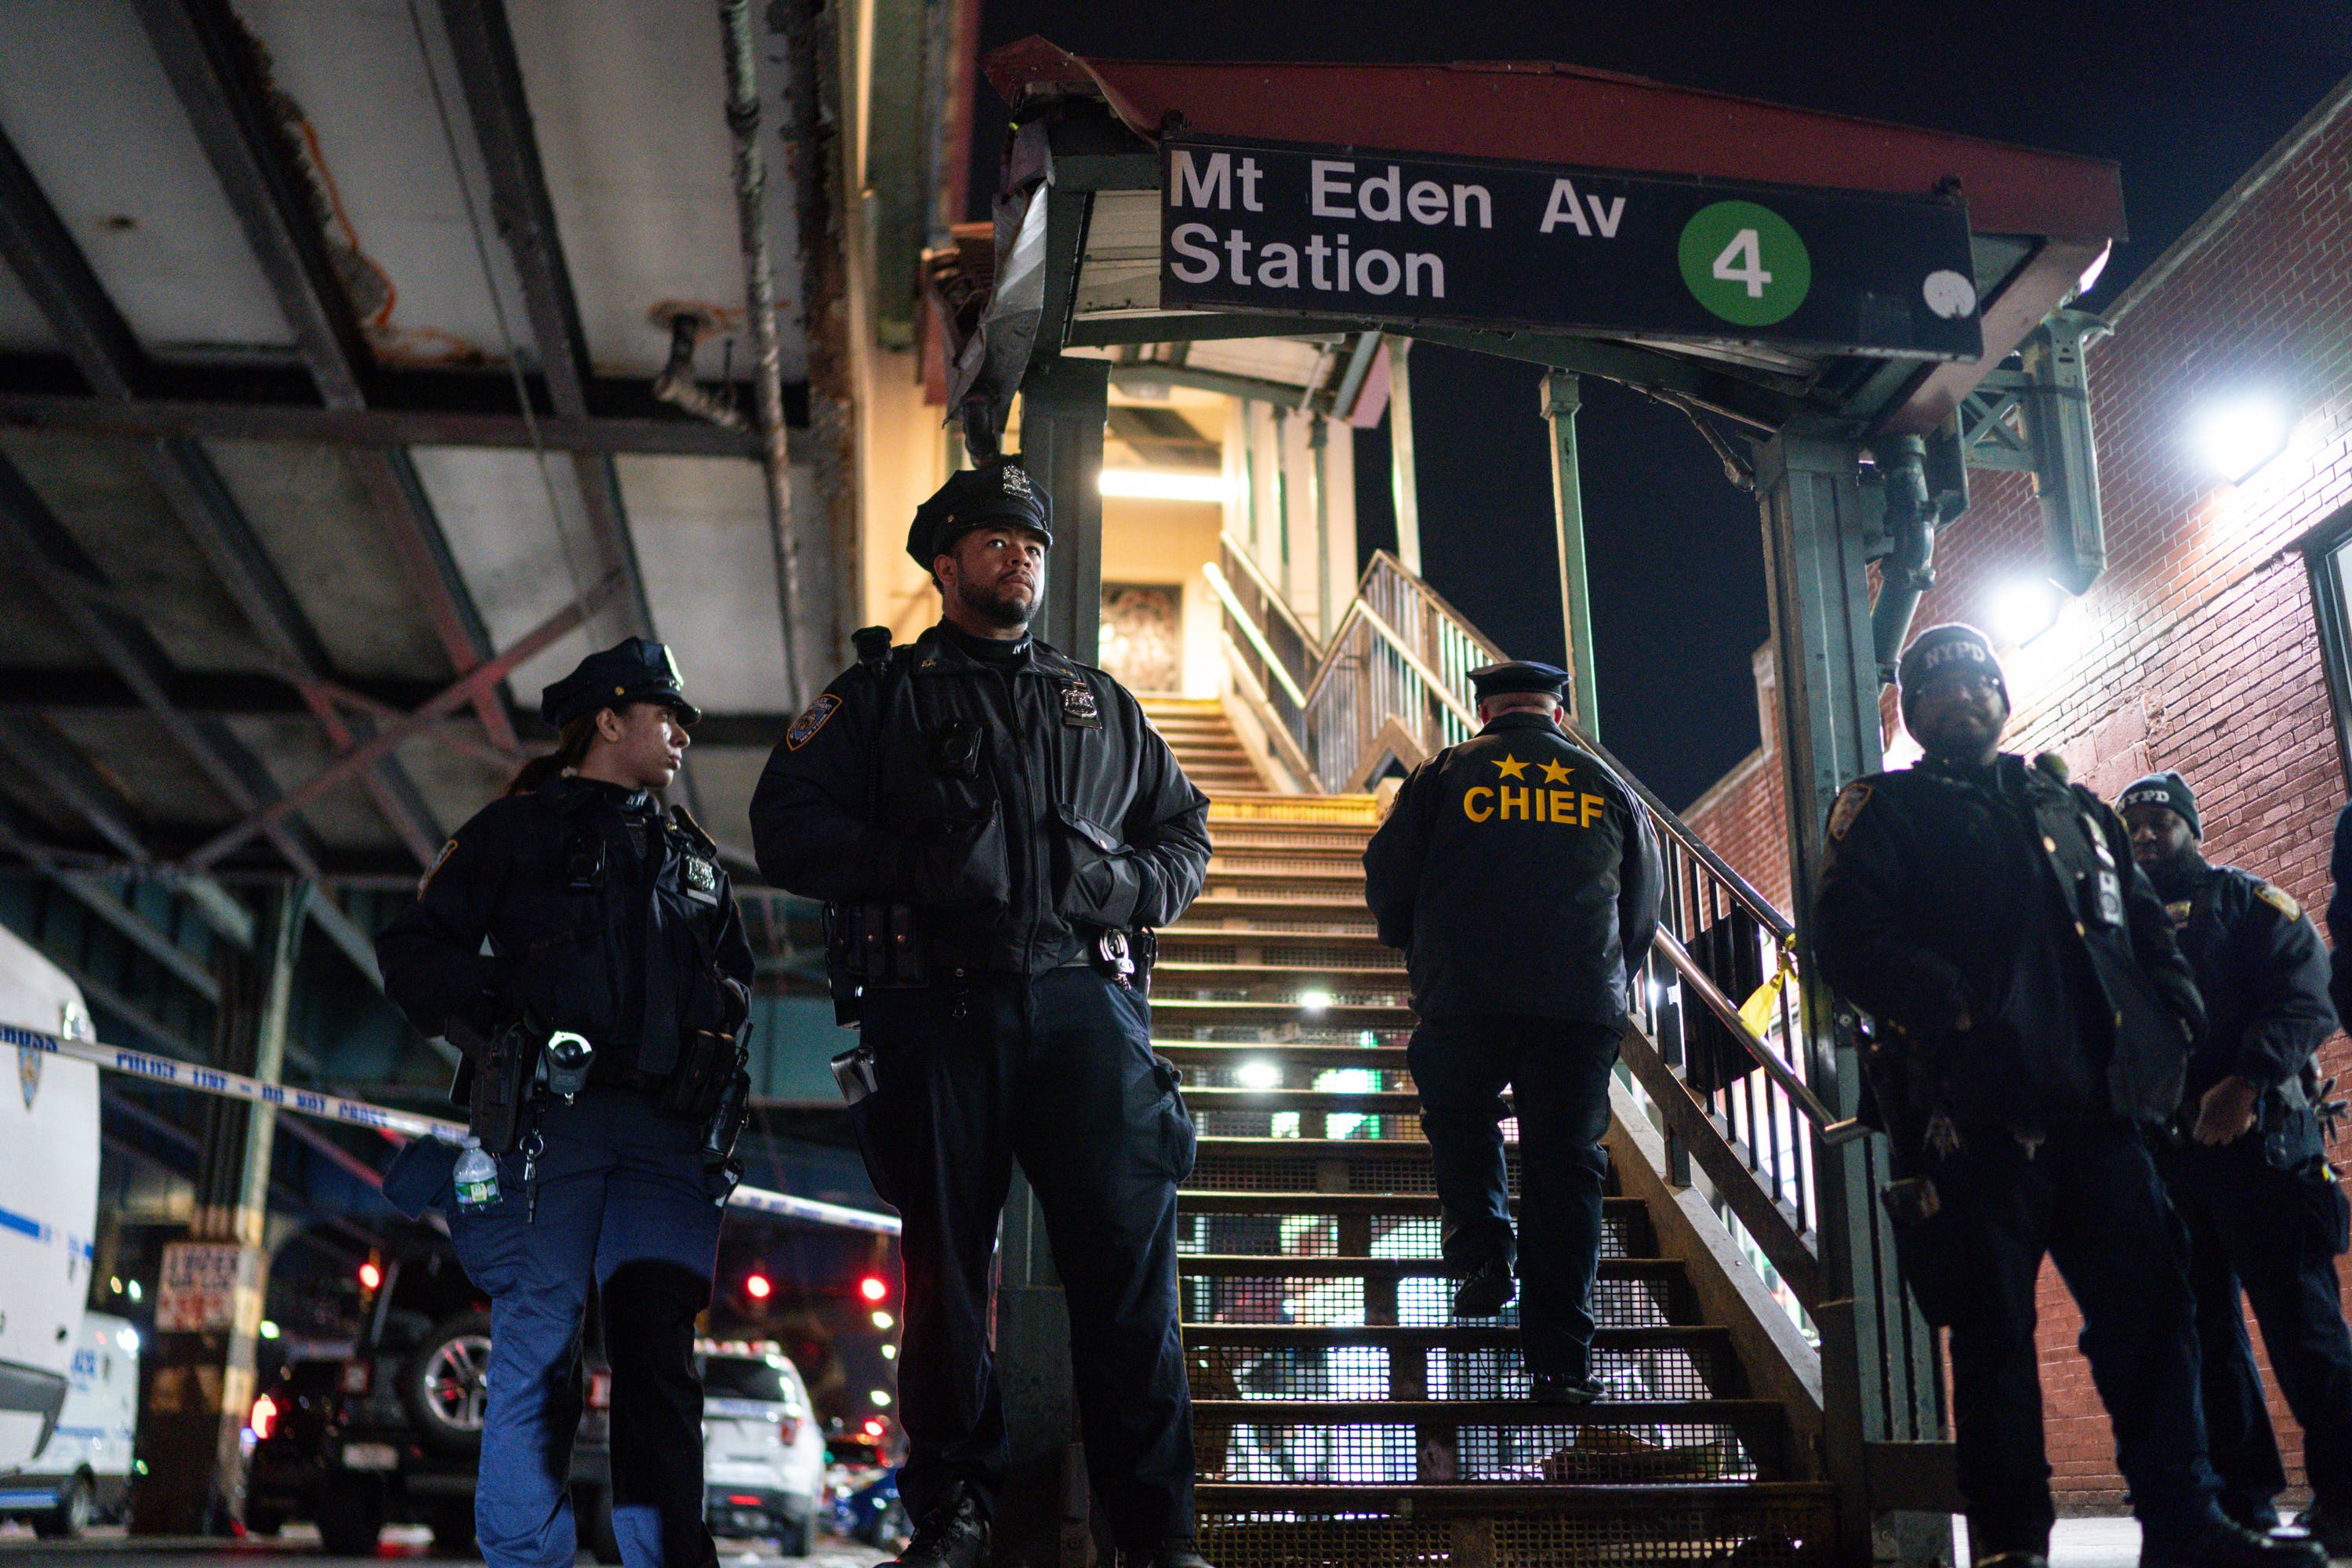 New York City Police officers stand guard following a shooting at the Mount Eden subway station in the Bronx. Photo: Eduardo Munoz Alvarez/AP.